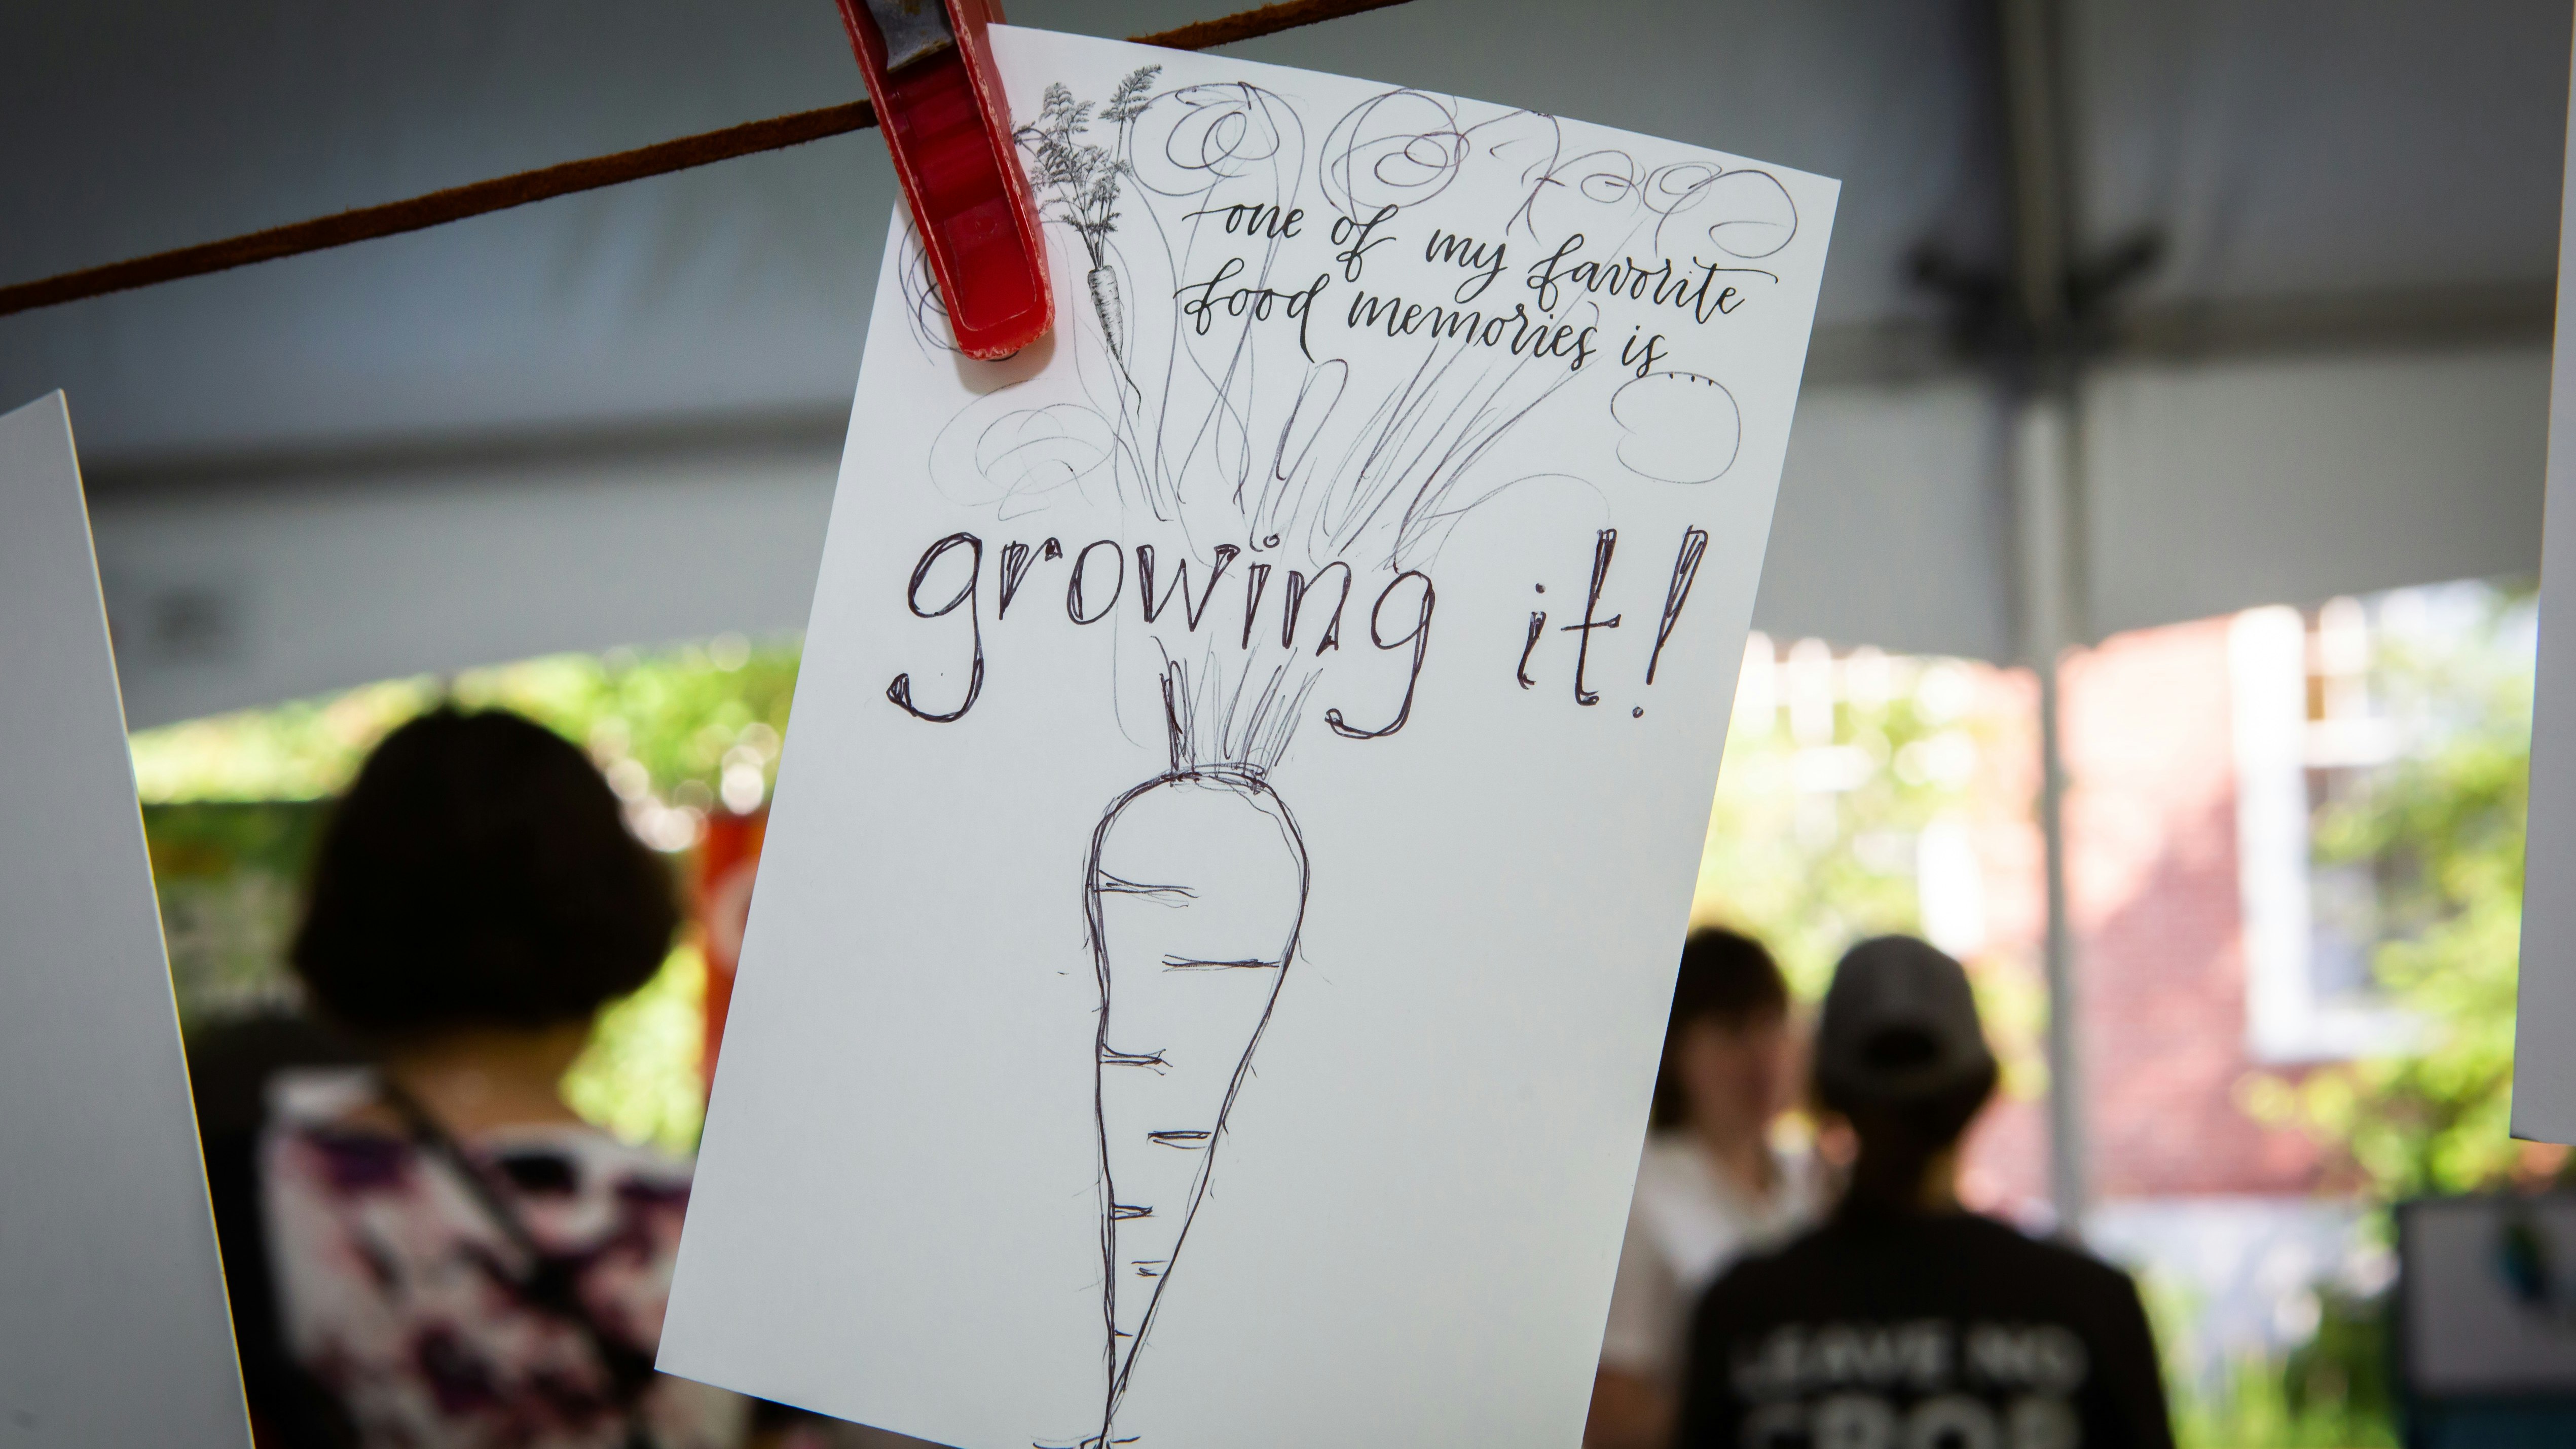 Piece of paper hanging by clotheline pin, with an illustration of a carrot and reading "one of my favorite food memories is.. growing it."